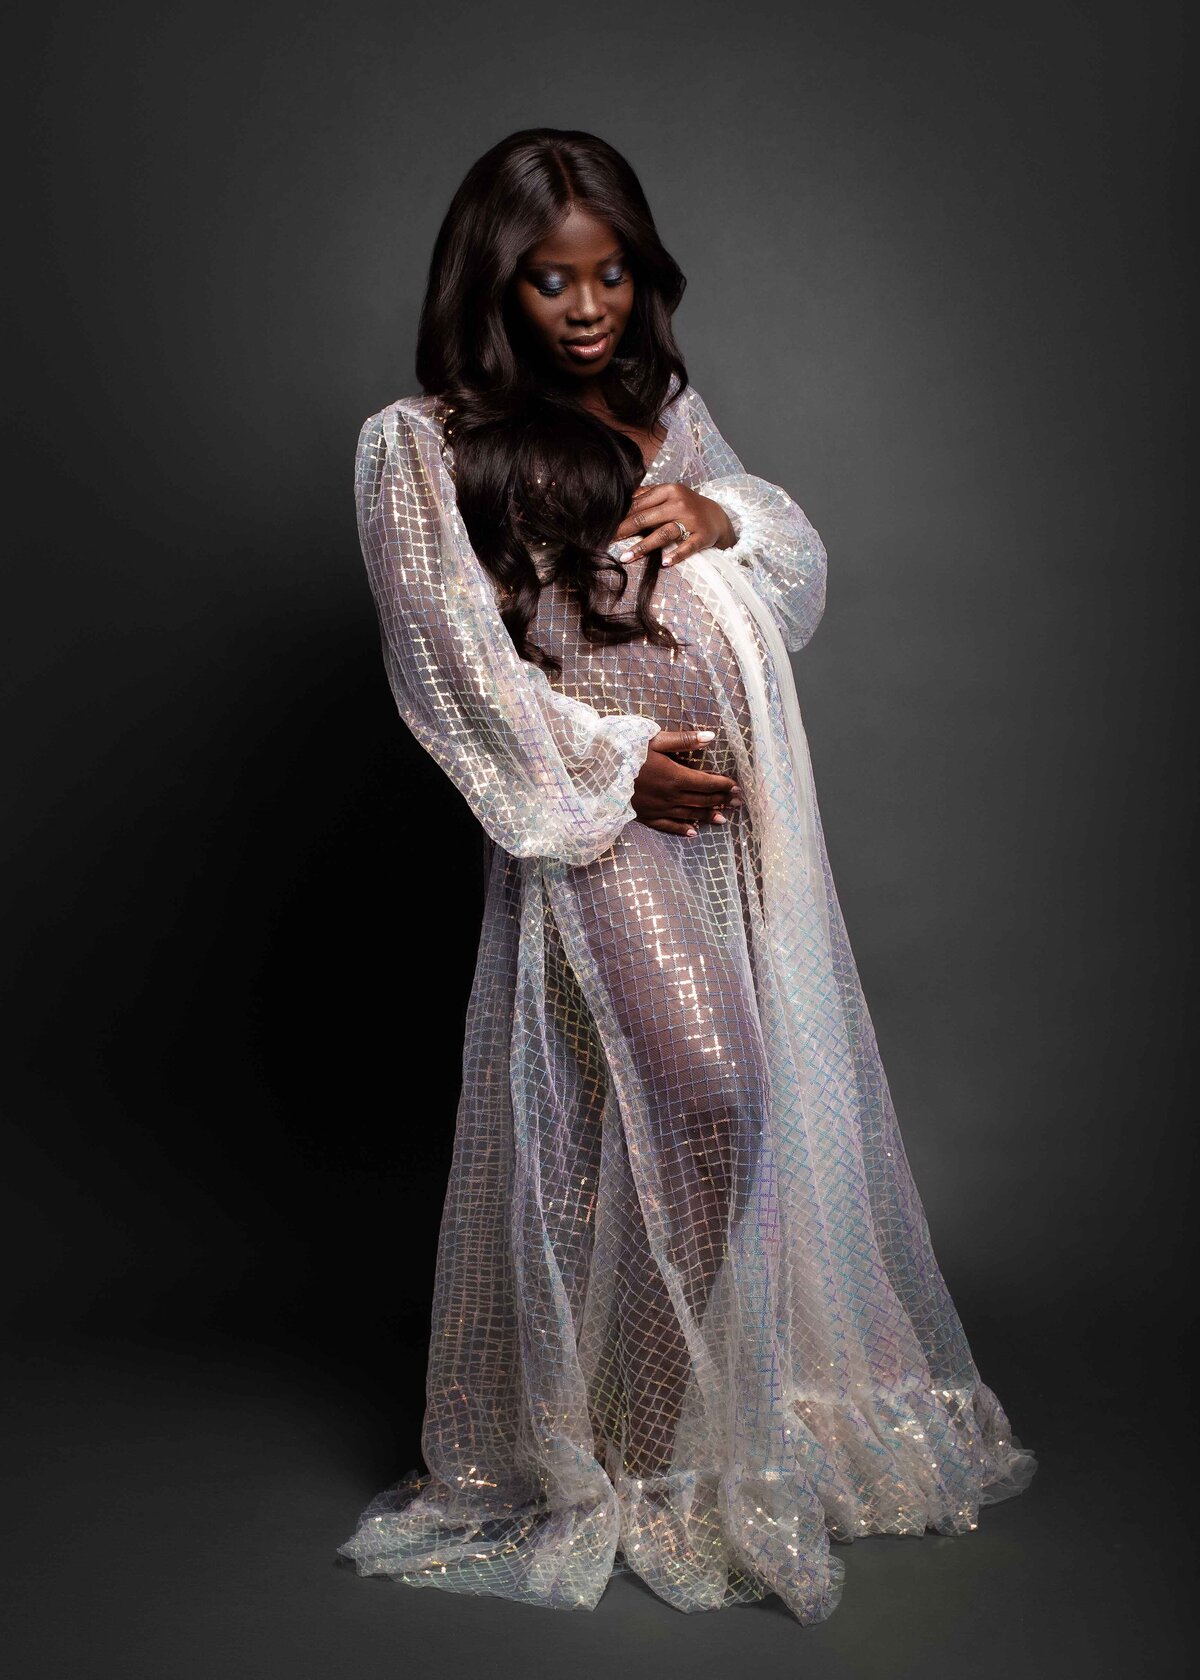 artistic-maternity-and-Boudoir-photography-by-Daisy-Rey-photography-in-new-jersey